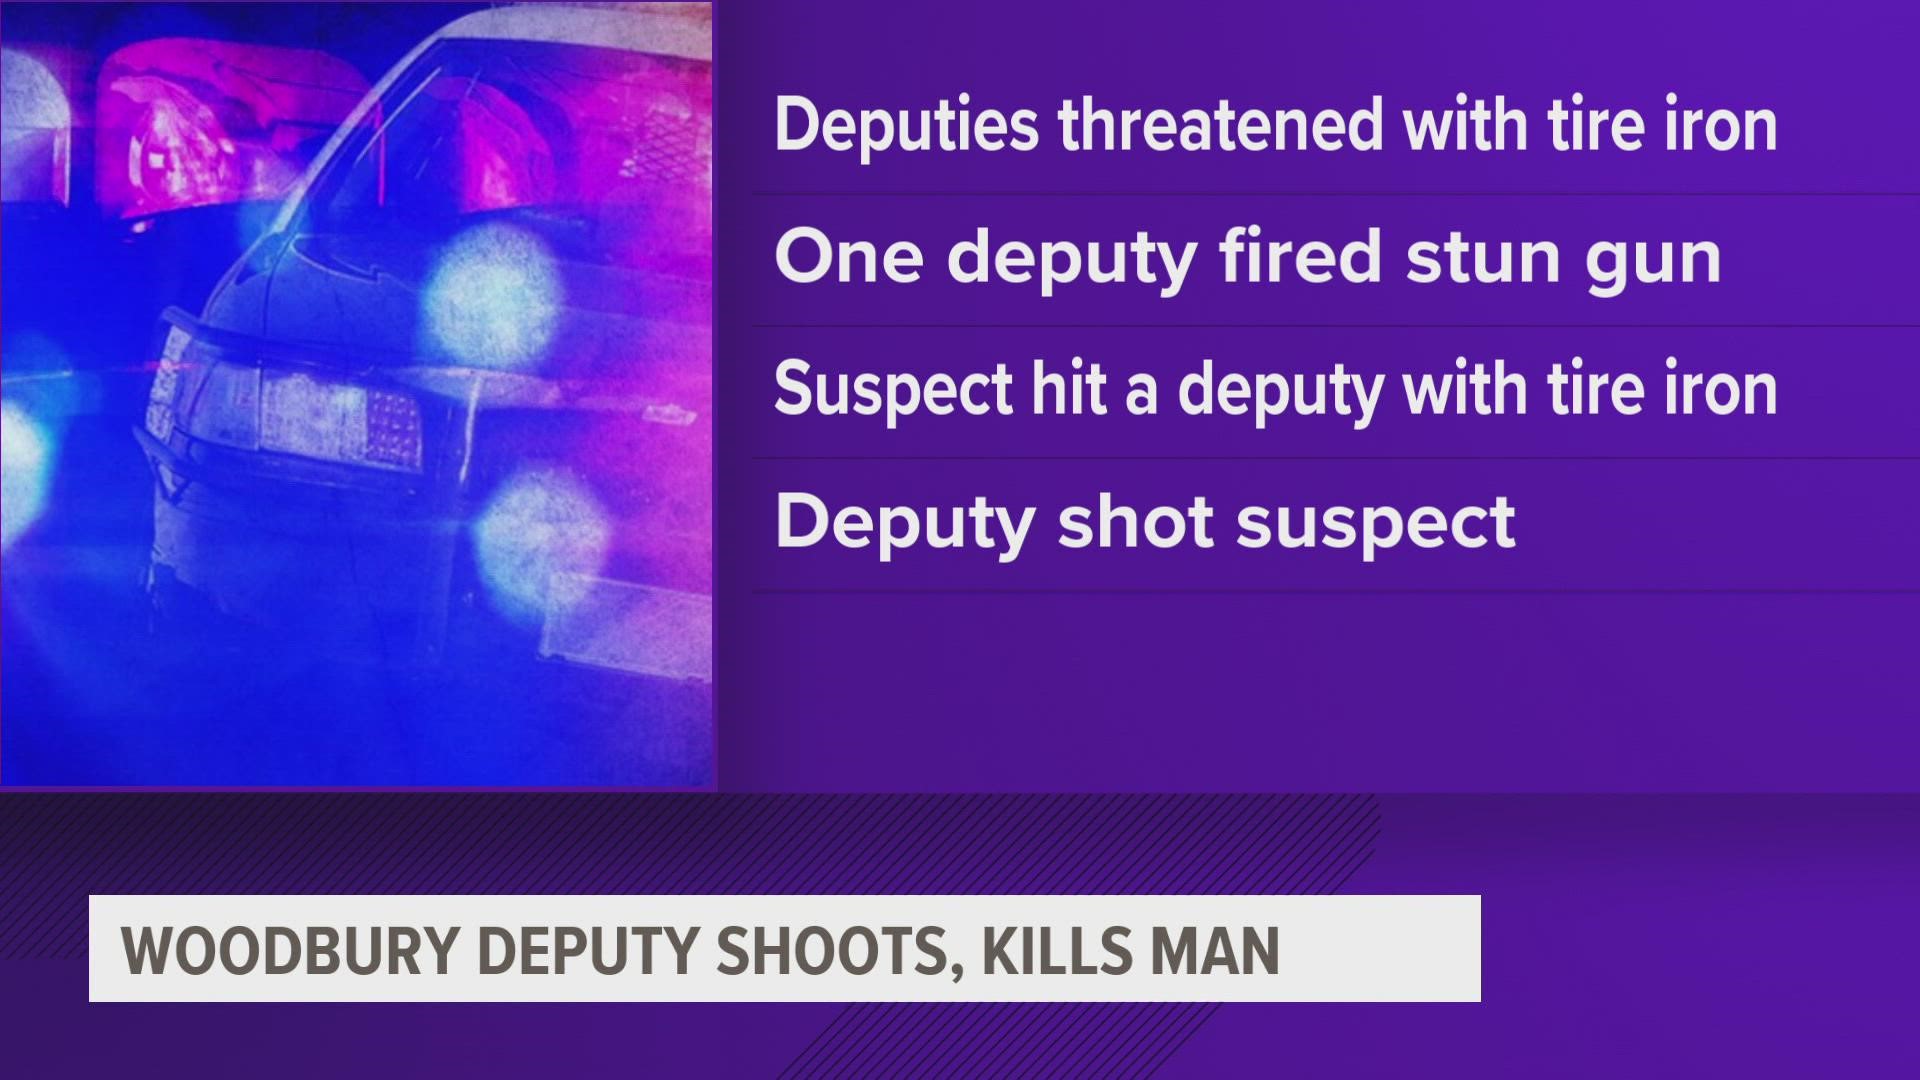 The Iowa Division of Criminal Investigation has yet to identify the man shot or the deputies involved in the incident.